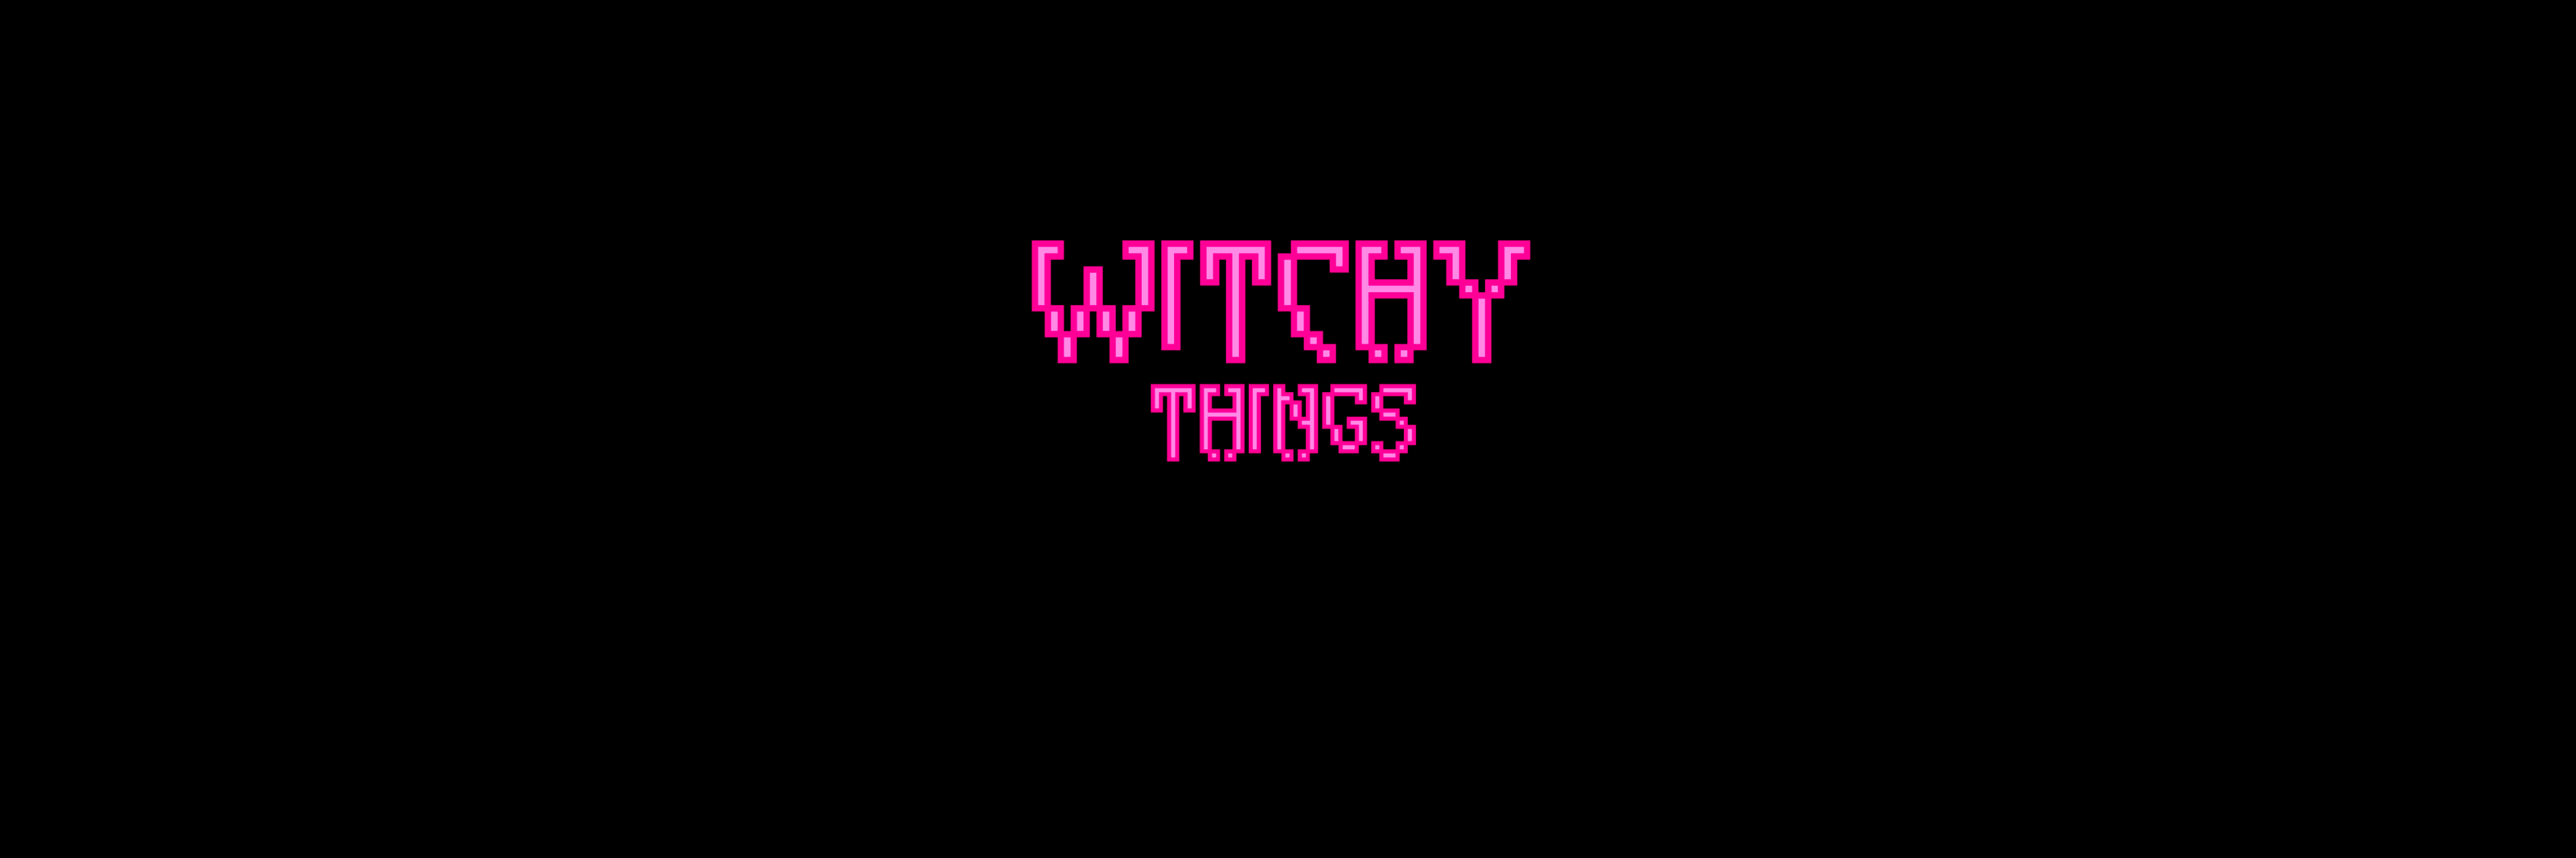 WitchyThingsNFT 橫幅